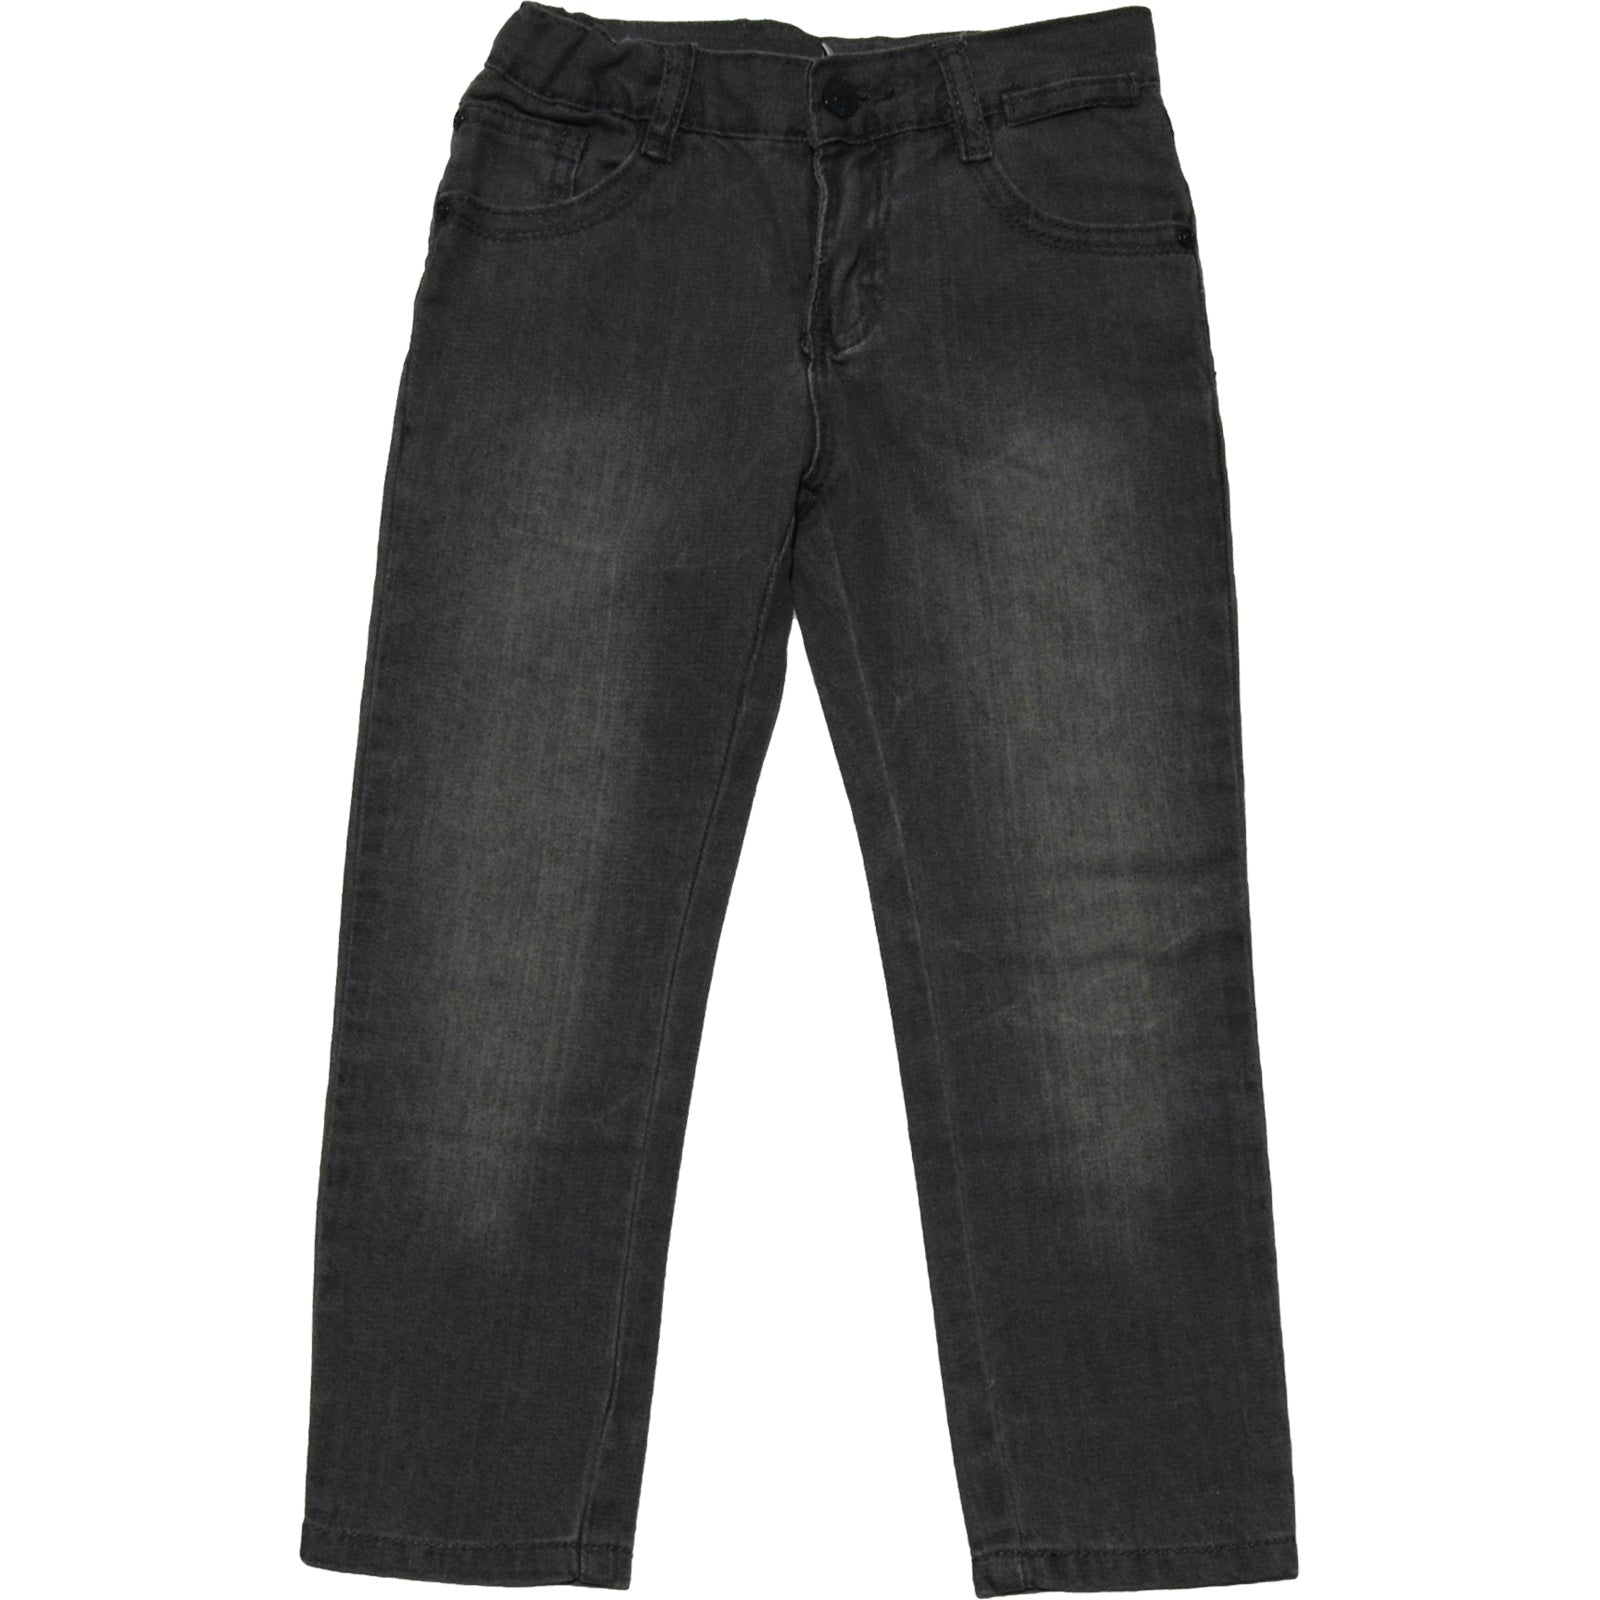 
  Denim trousers from the Tuc Tuc children's clothing line, gray color, 5 pockets with waist adj...